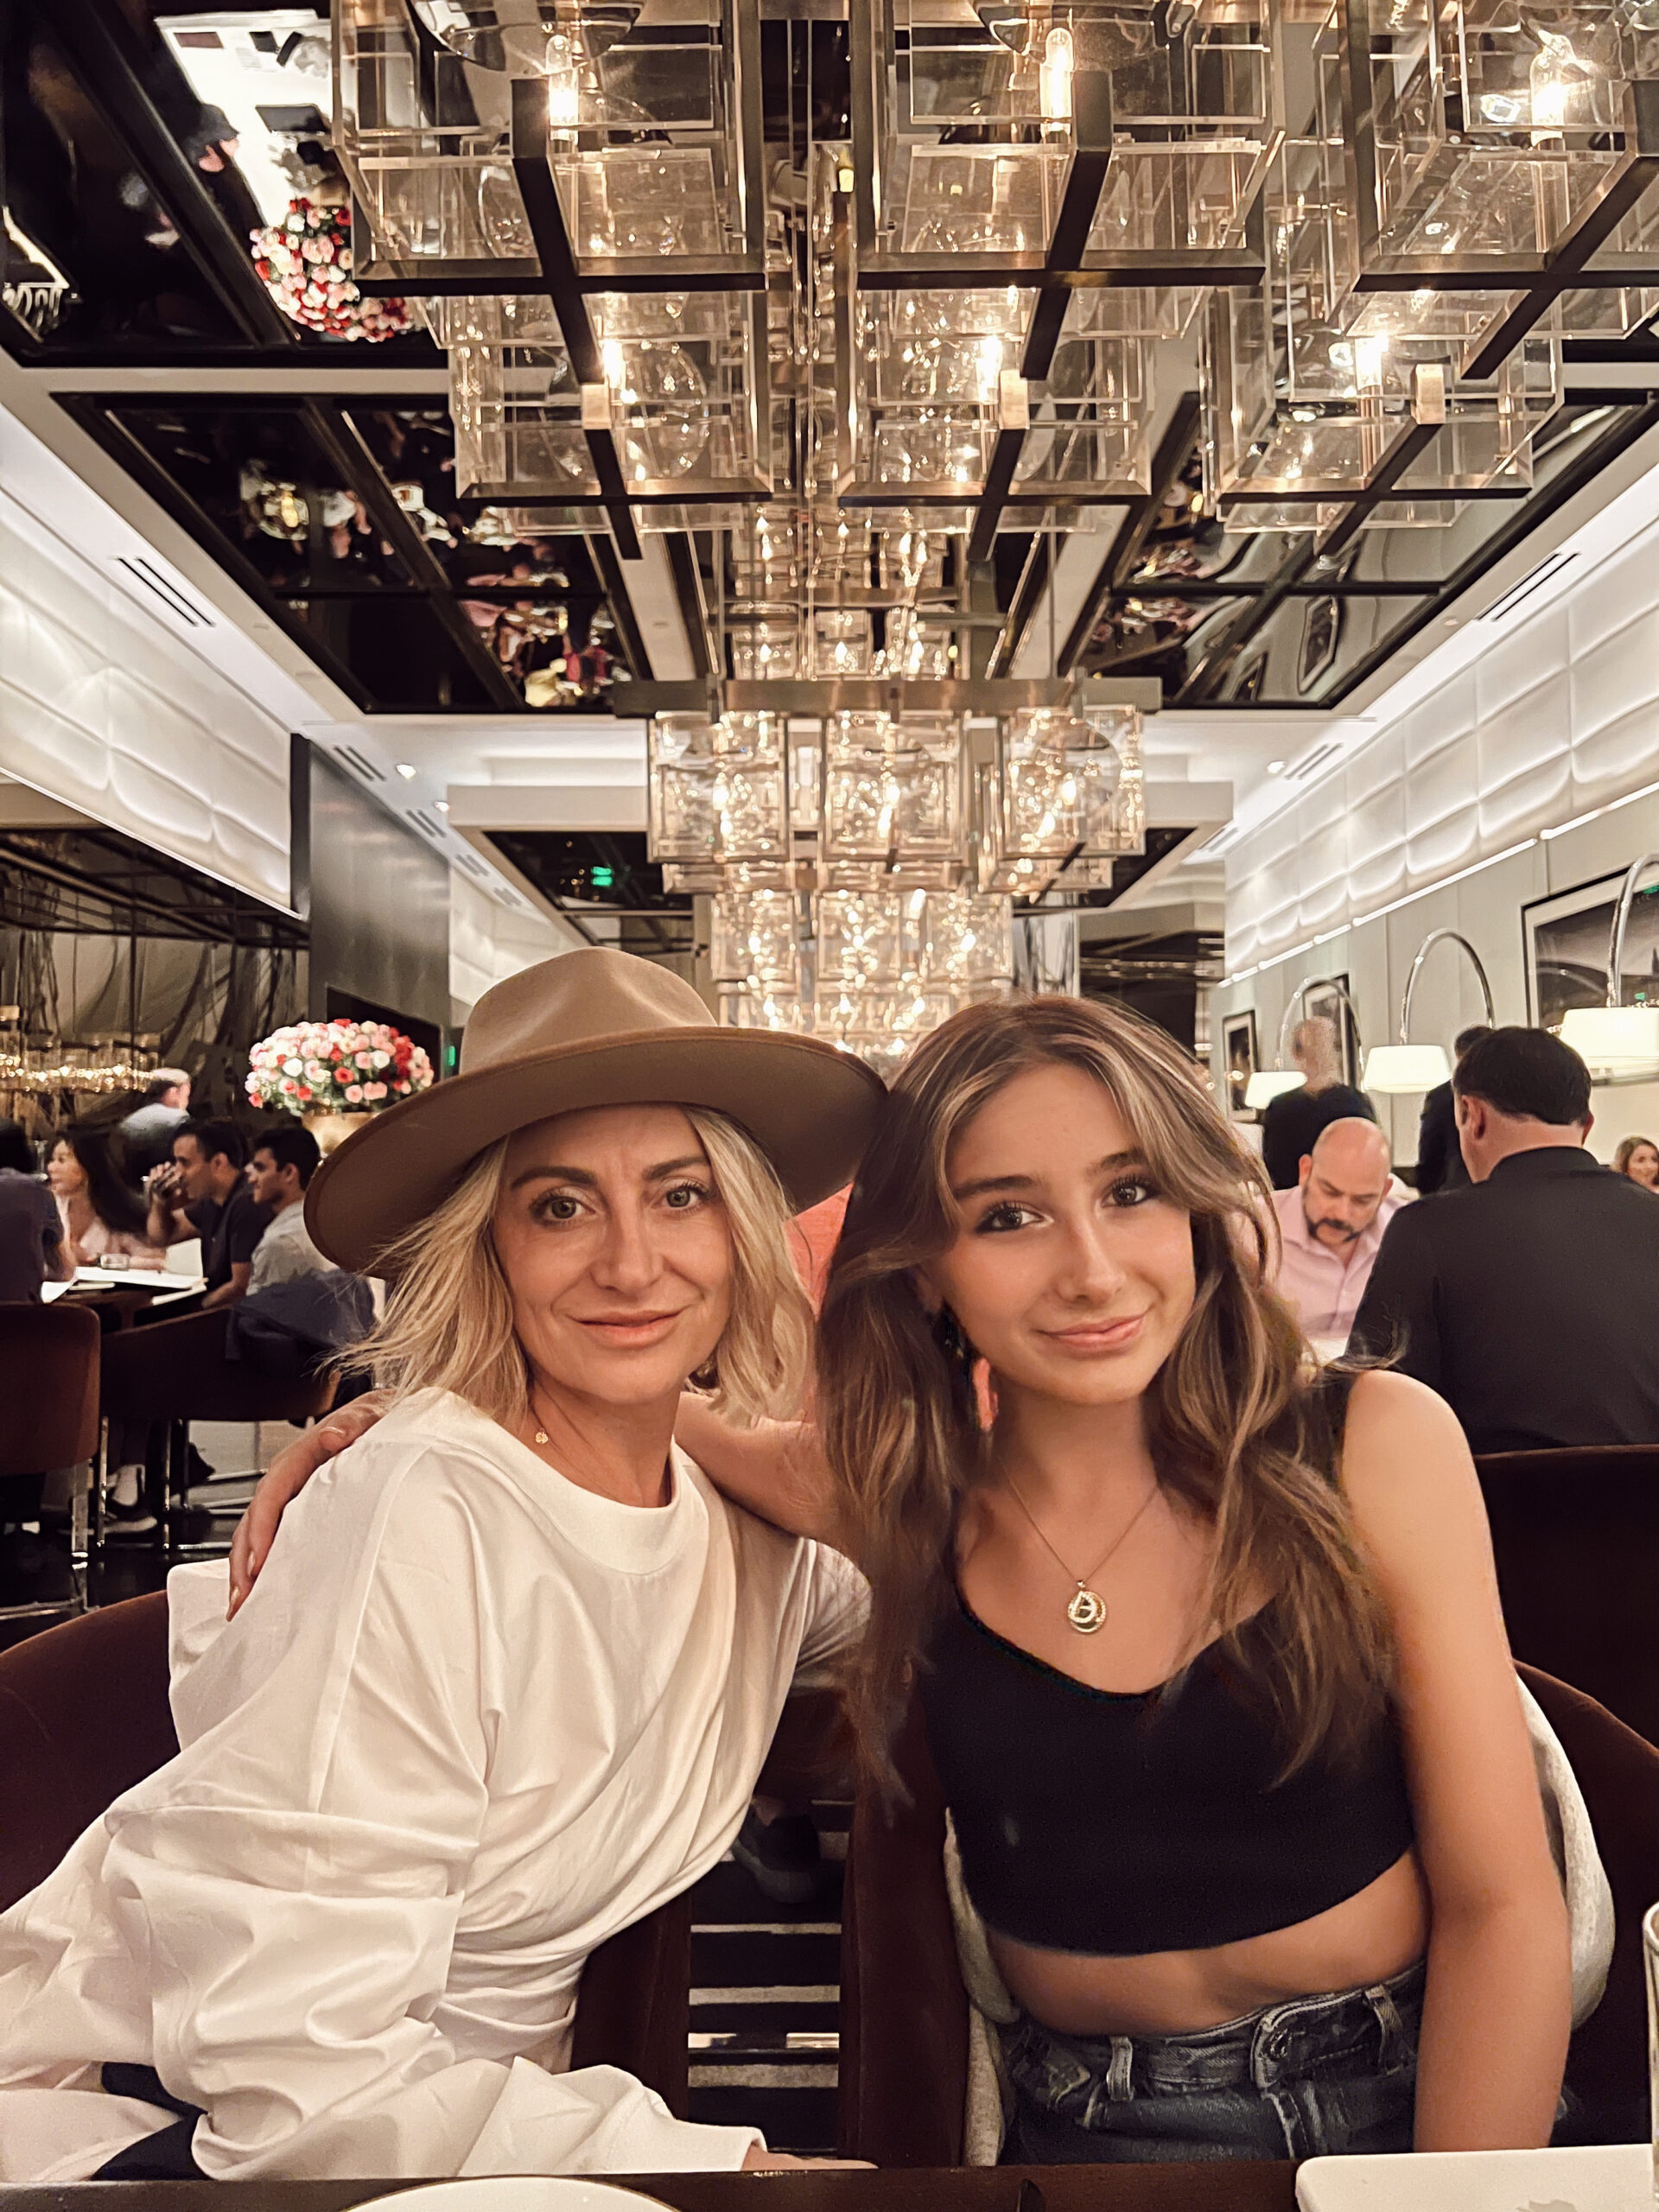 mother and daughter in restaurant